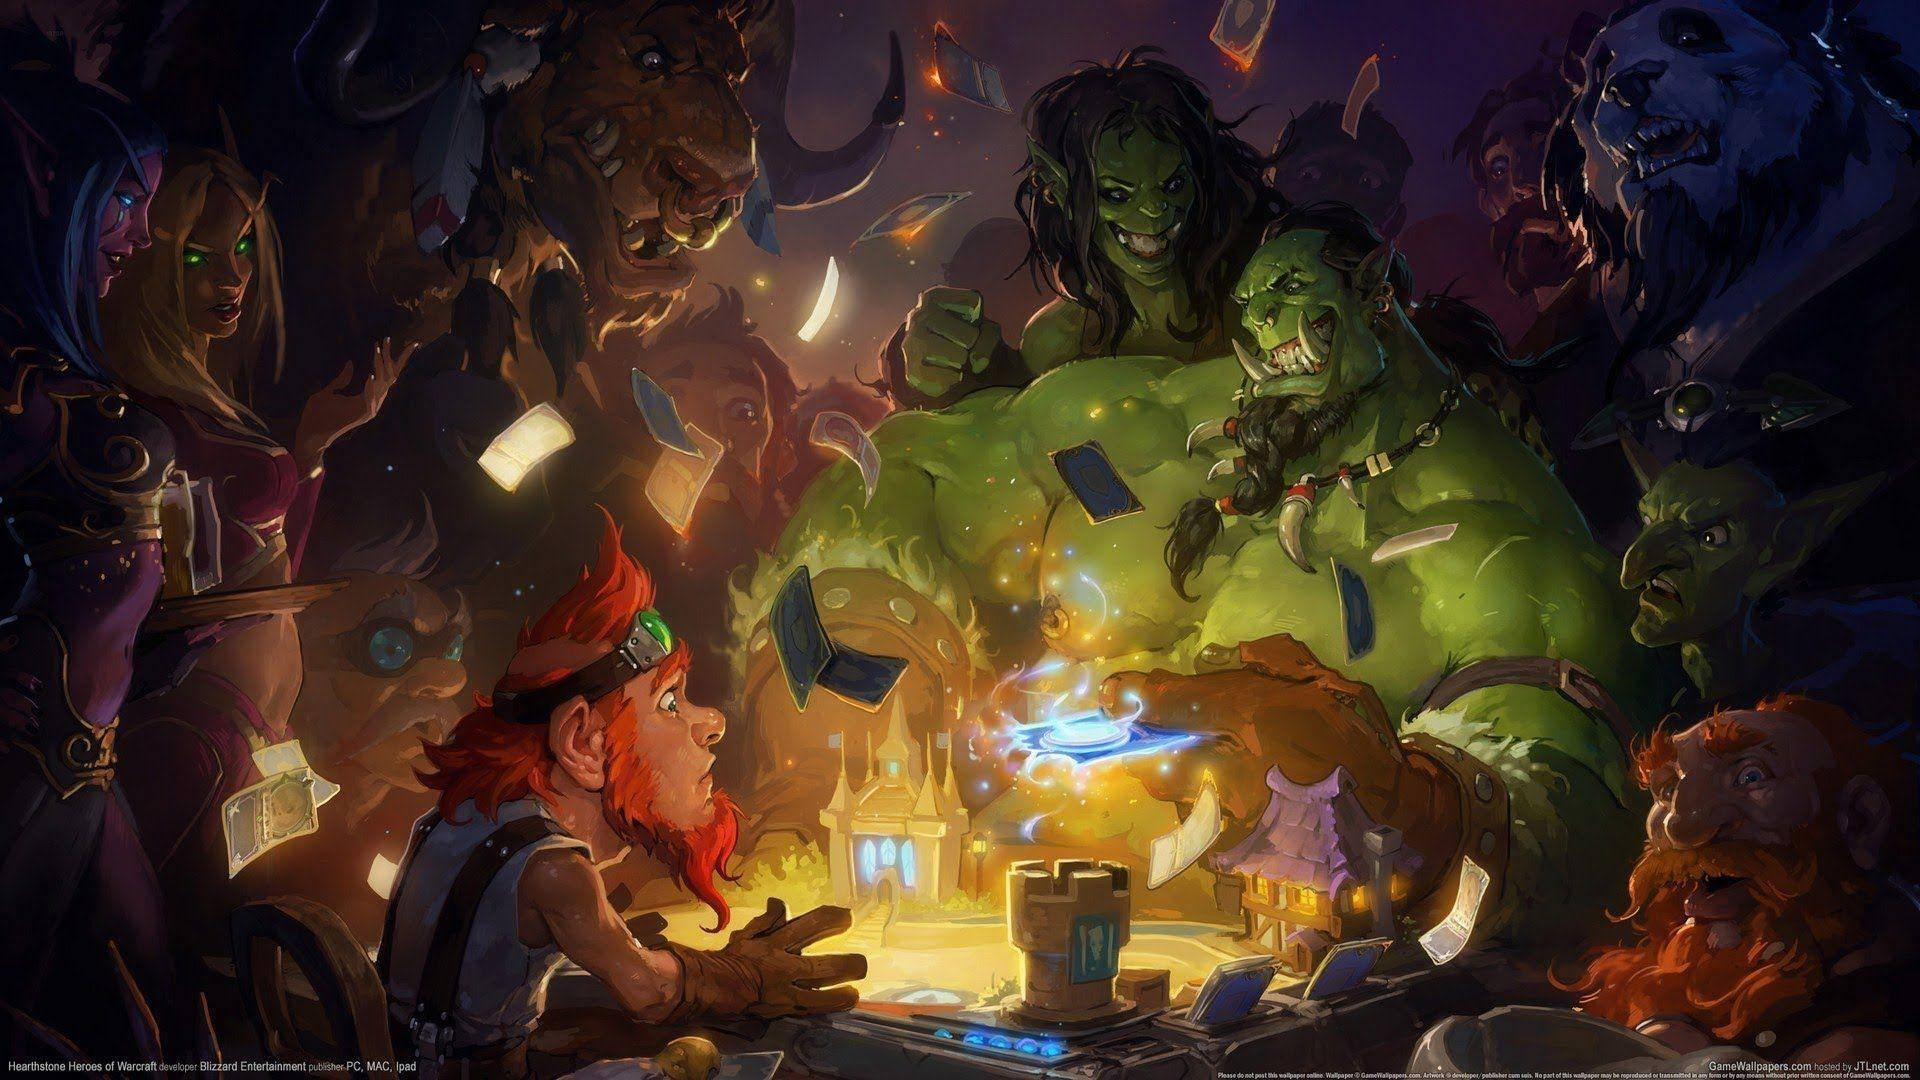 Dynamic Battle Scene From Hearthstone: Heroes Of Warcraft Game In 2560 X 1440 Resolution Background